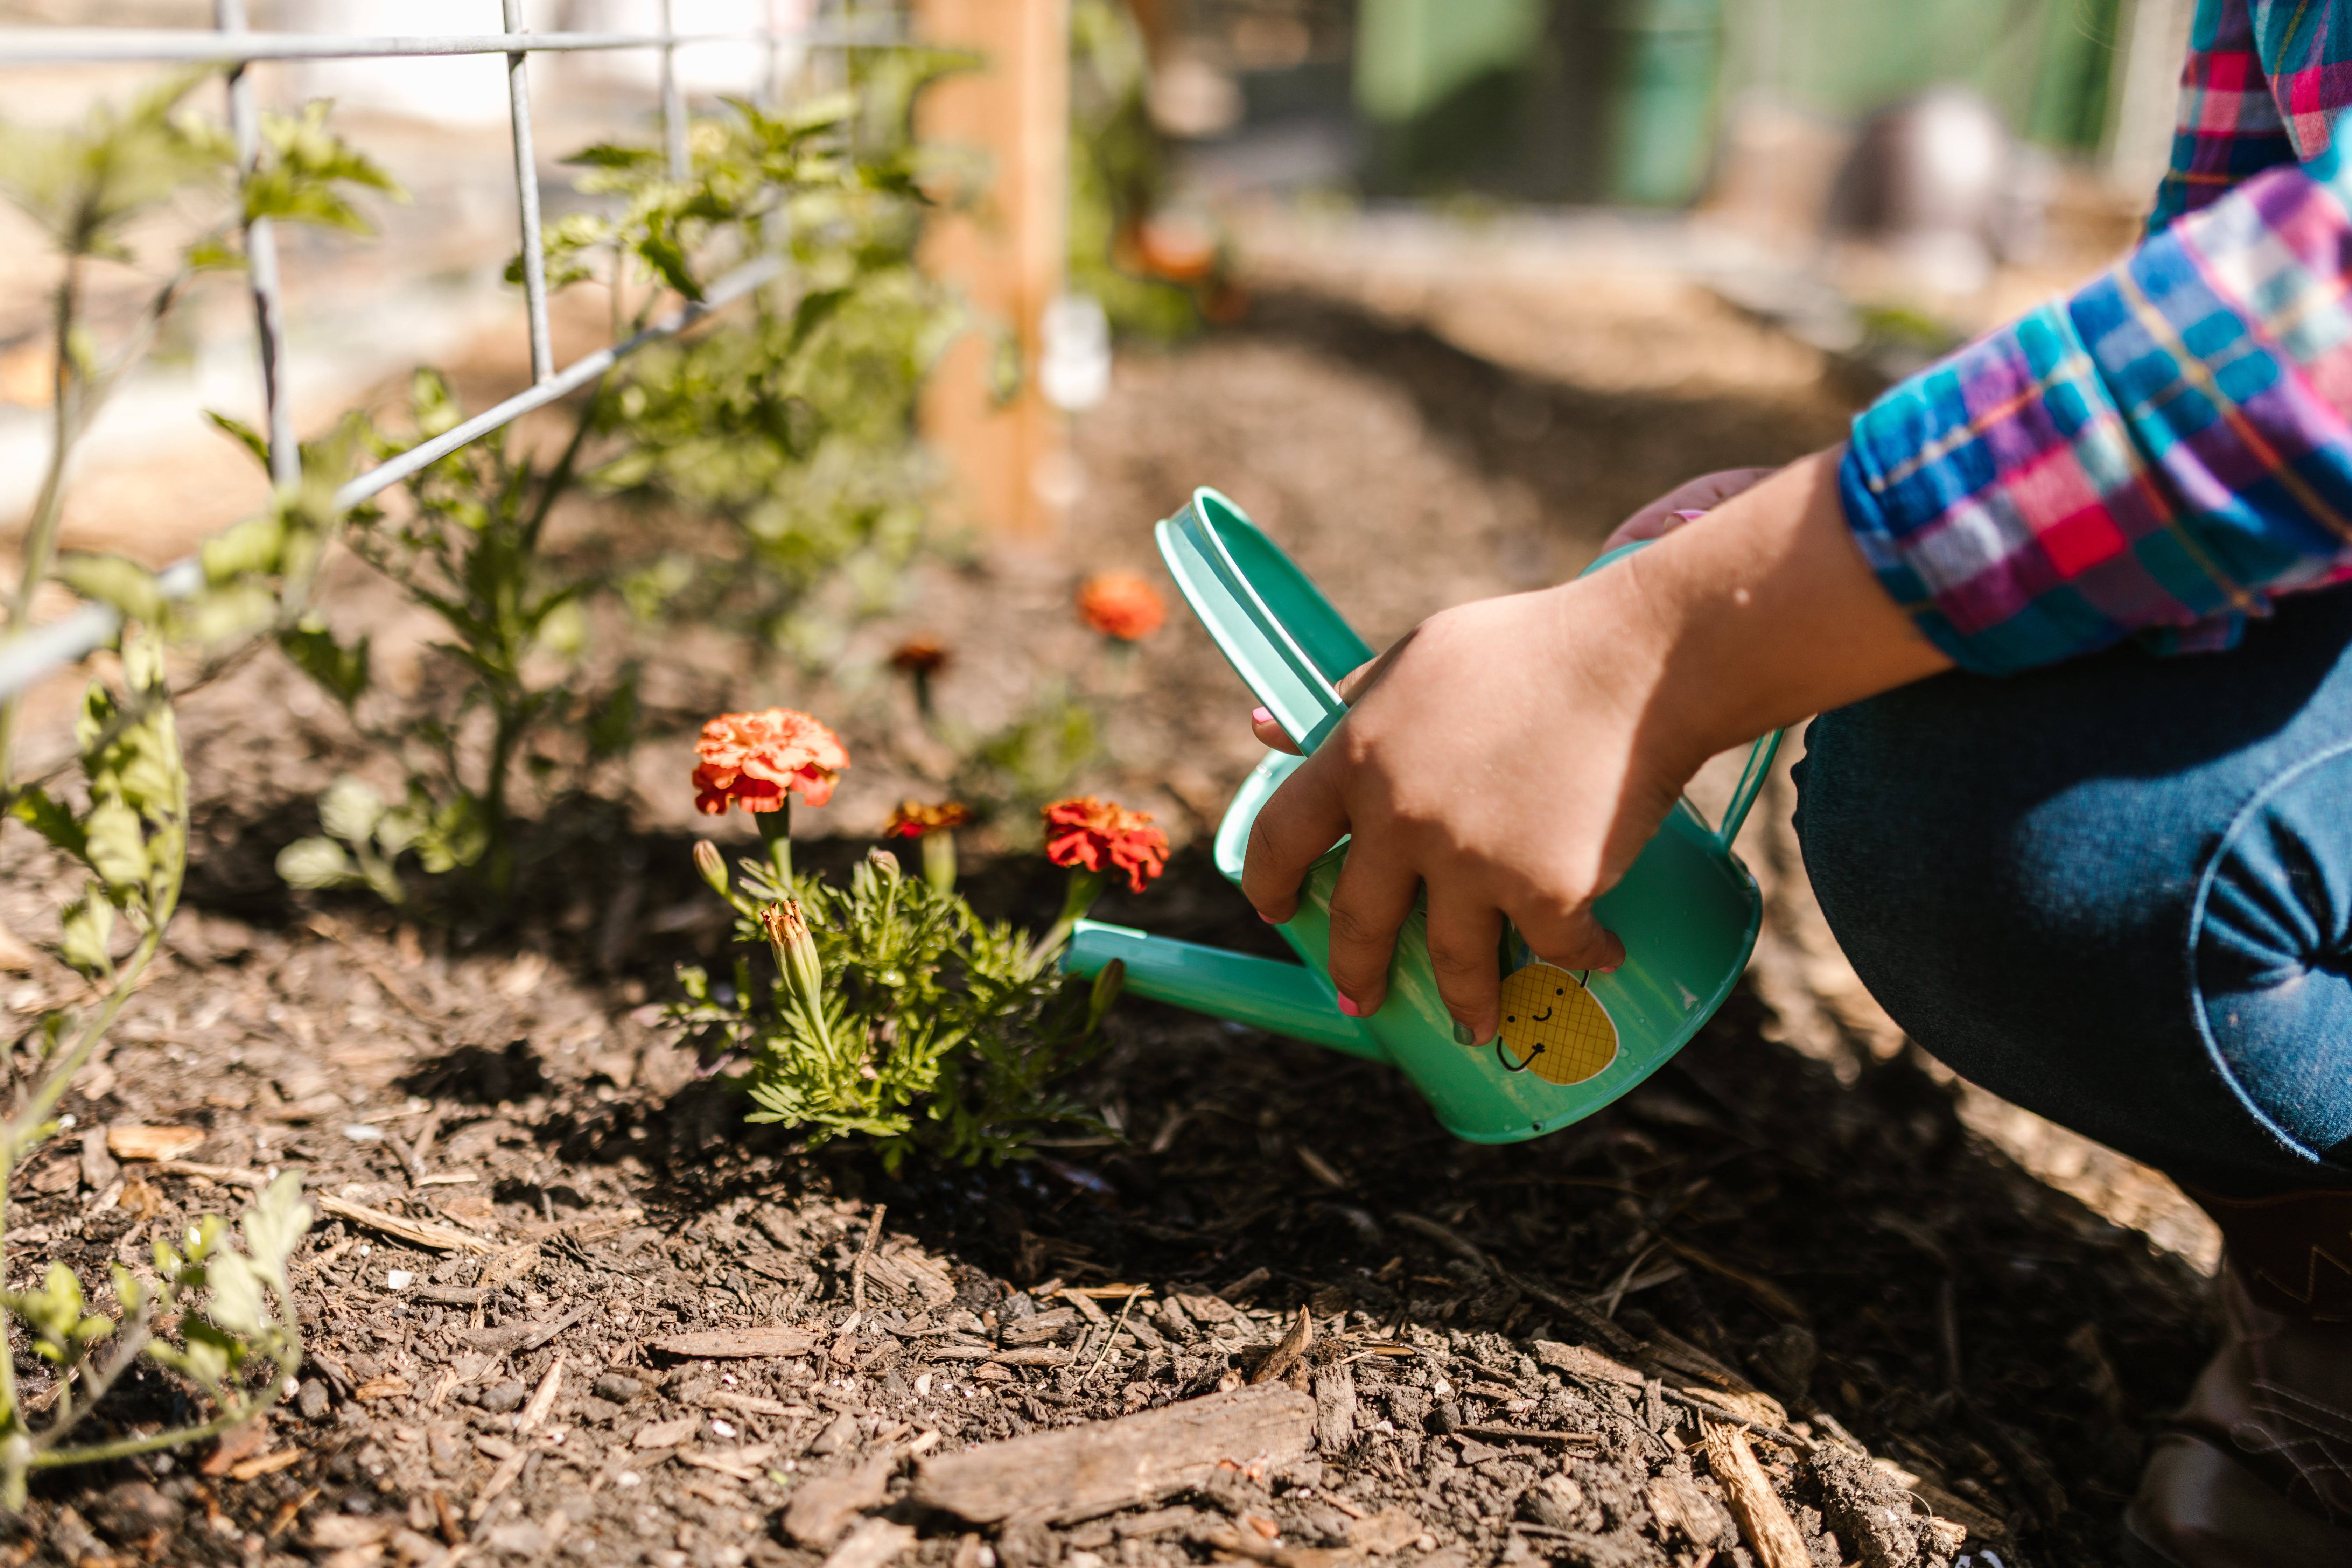 A person holding a green watering can learning how to create a sustainable garden